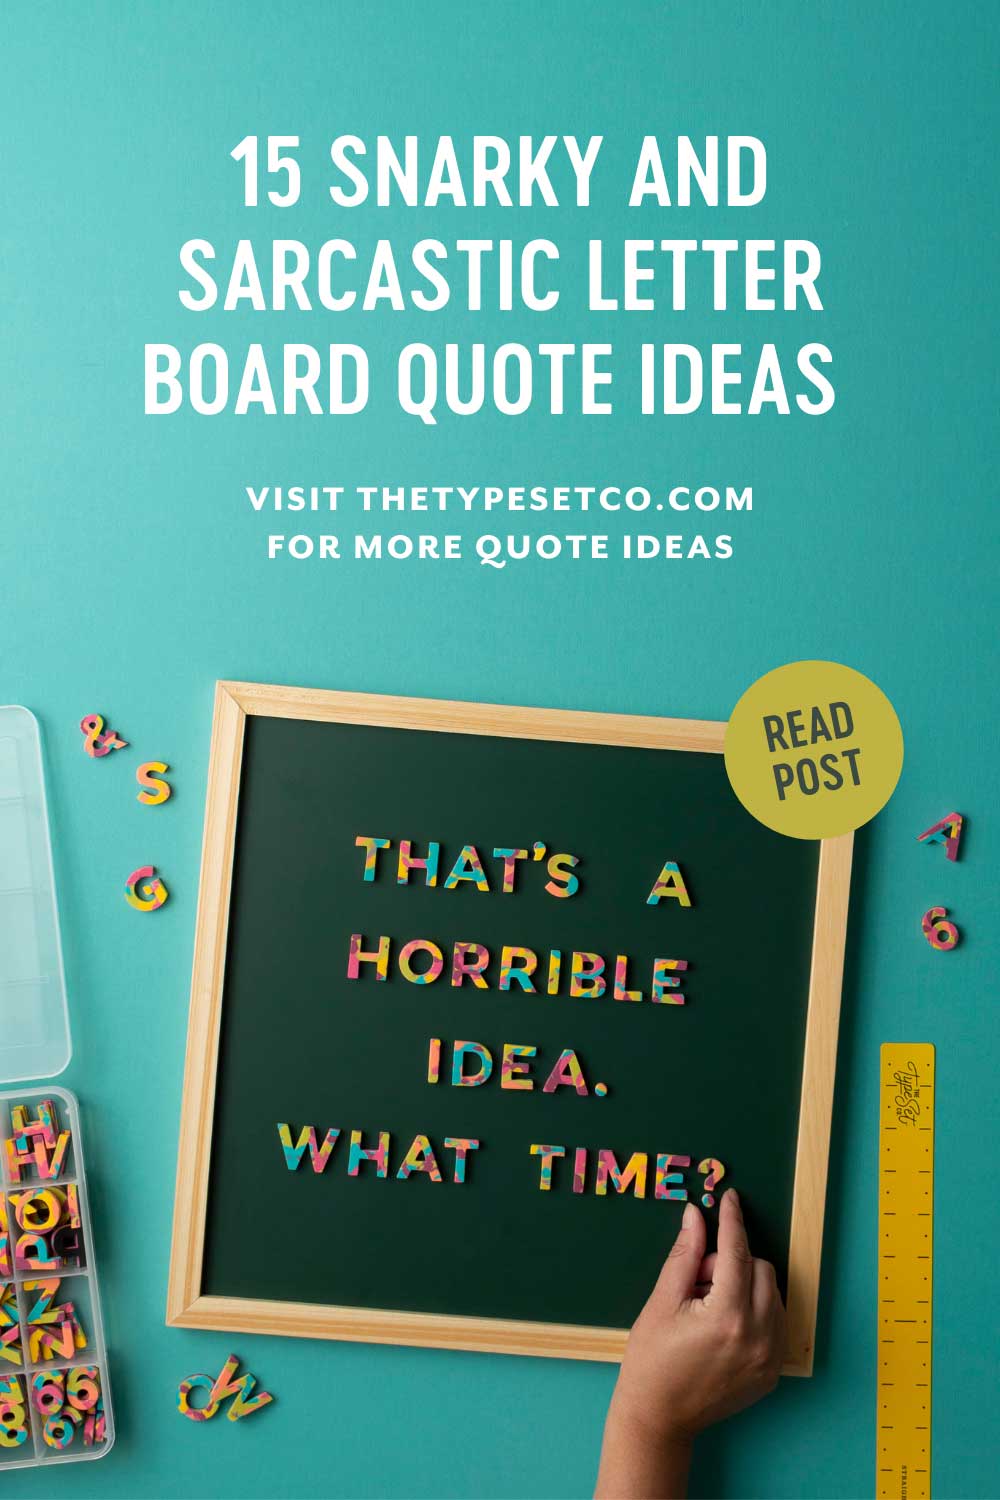 15 Snarky and Sarcastic Letterboard Quote Ideas